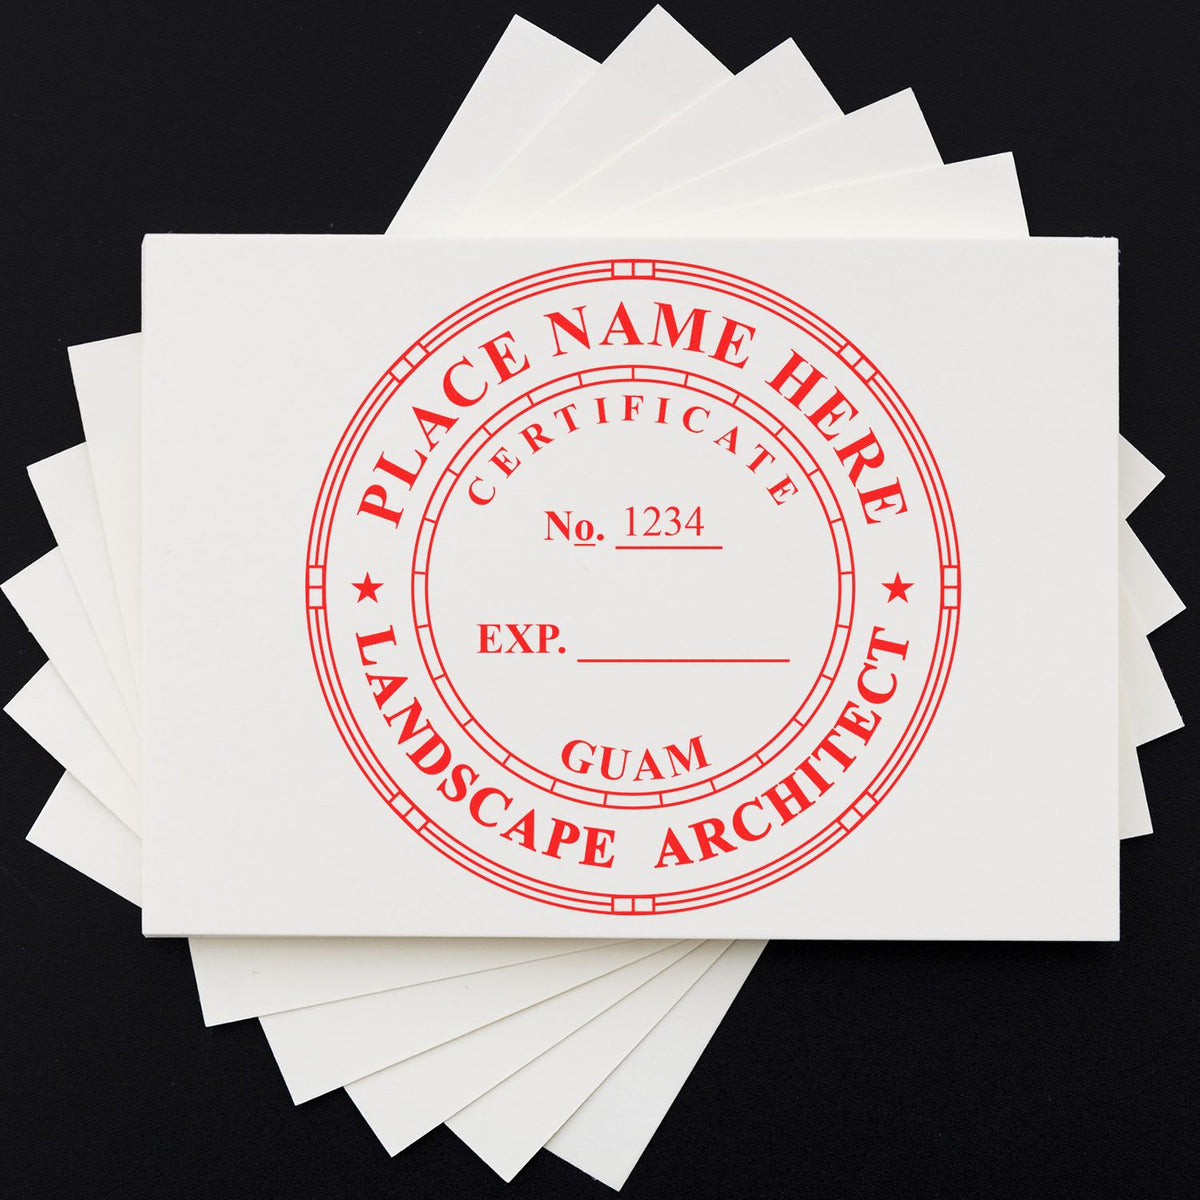 A photograph of the Digital Guam Landscape Architect Stamp stamp impression reveals a vivid, professional image of the on paper.